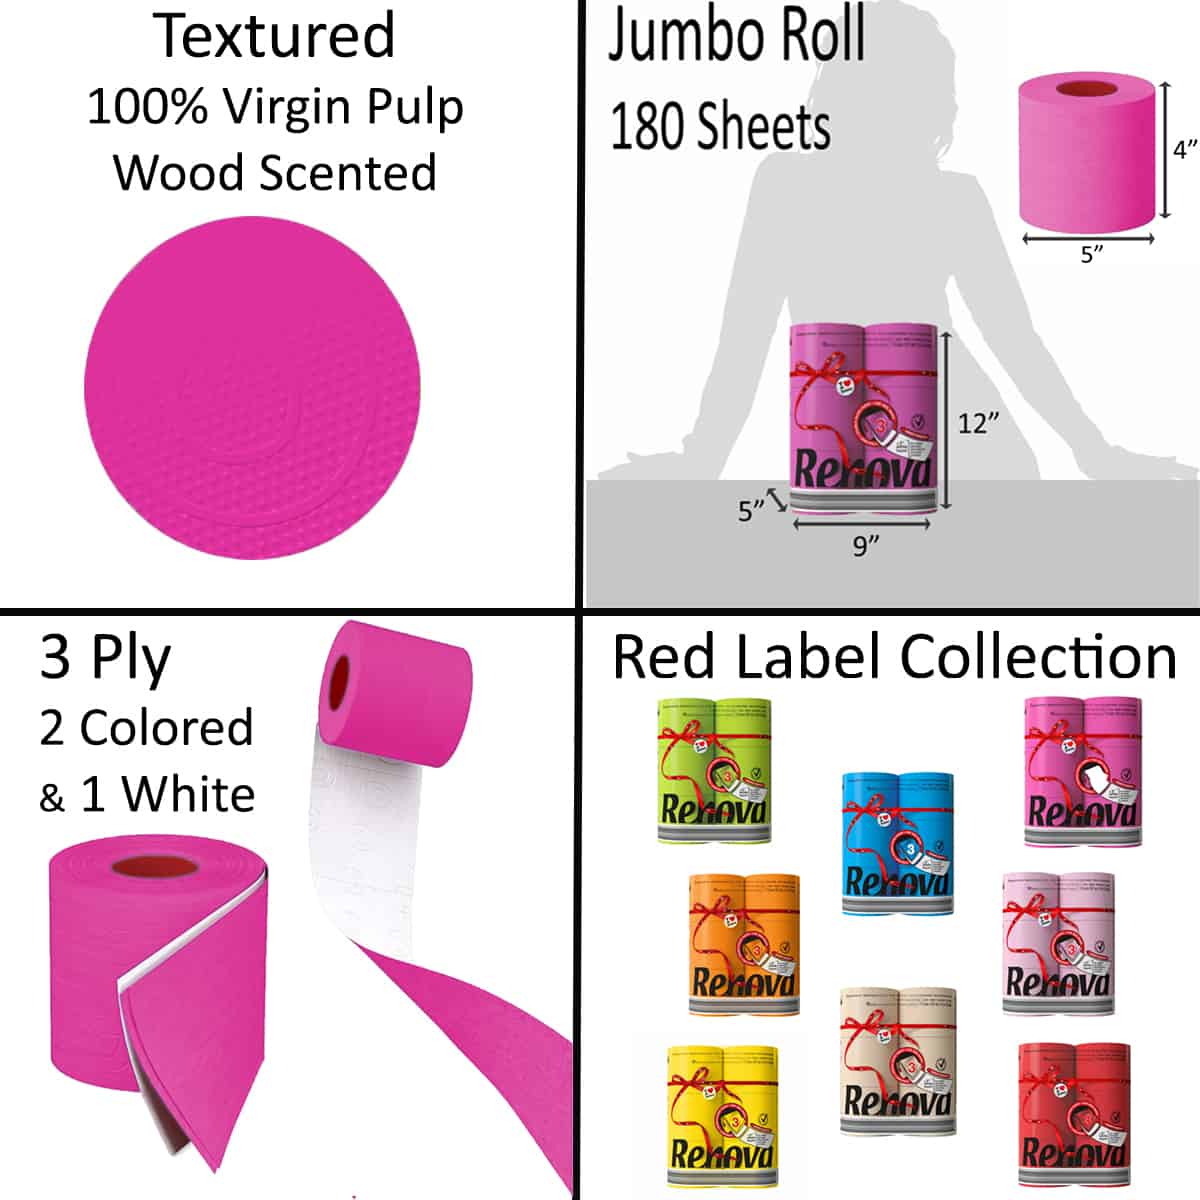 Luxury Scented Colored Toilet Paper 6 Jumbo Rolls 3-Ply-180 Sheets Box 12 packs-72R